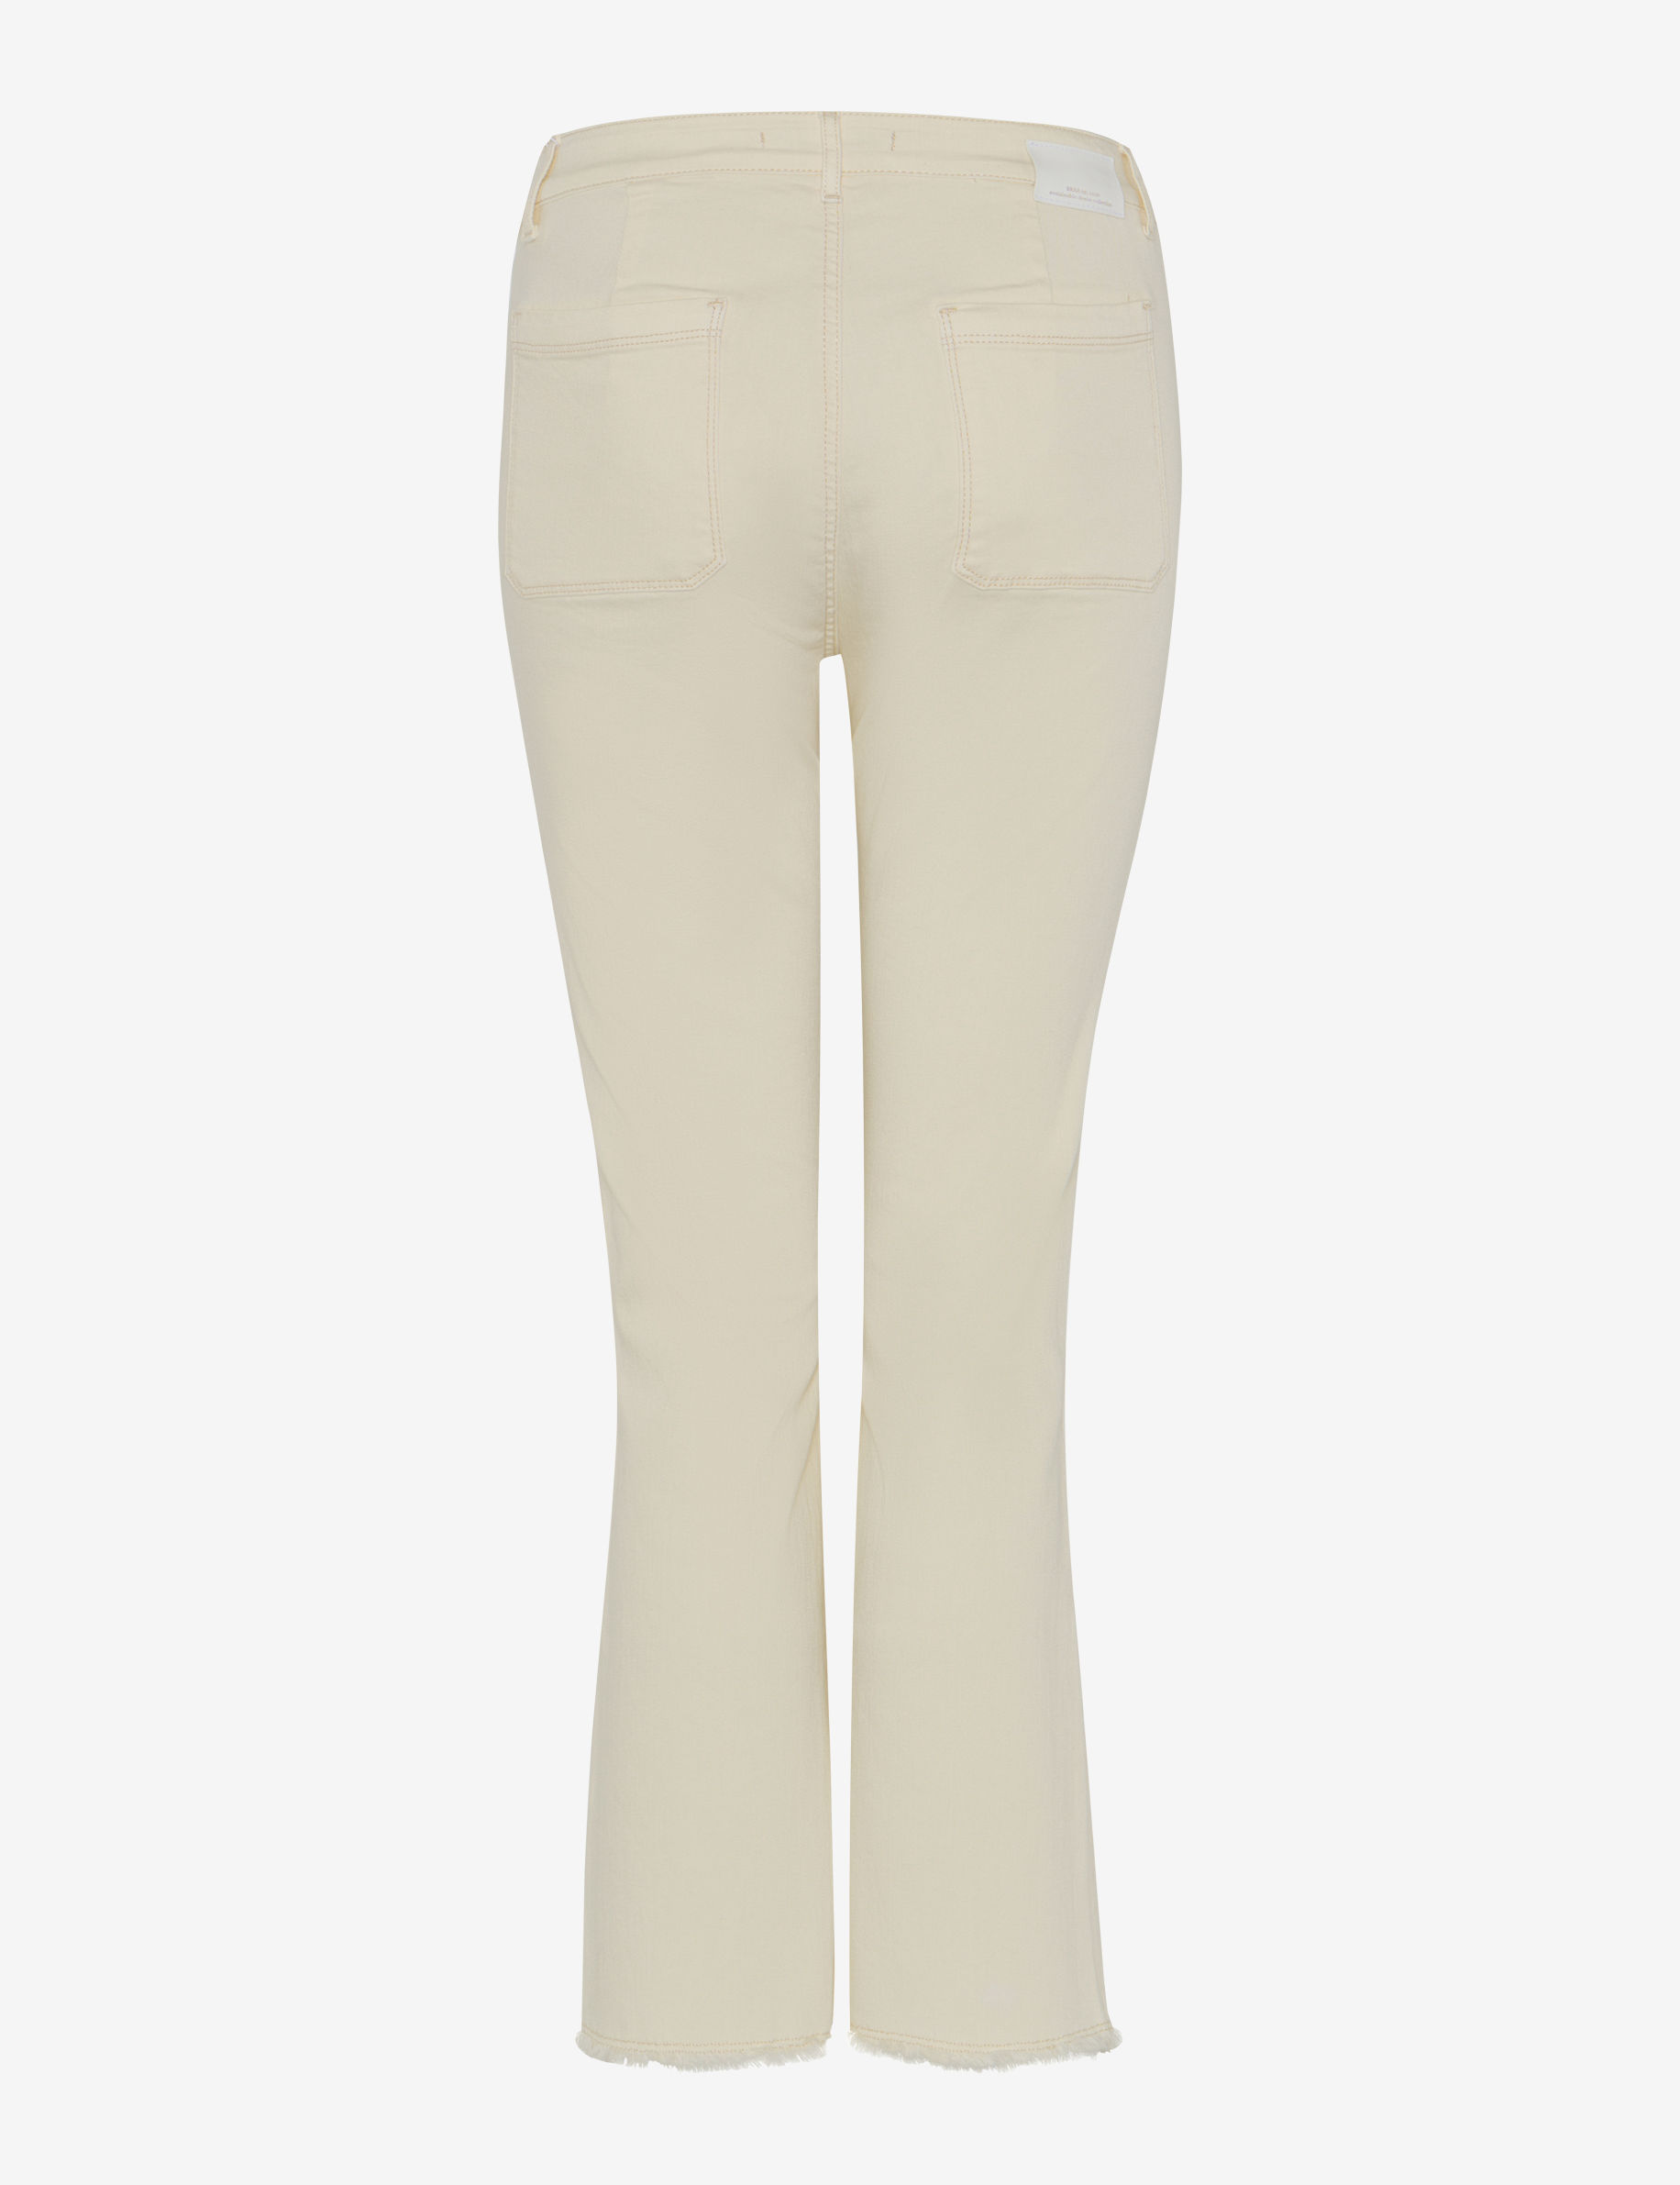 Women Style ANA S SOFT BEIGE Skinny Fit Stand-alone rear view